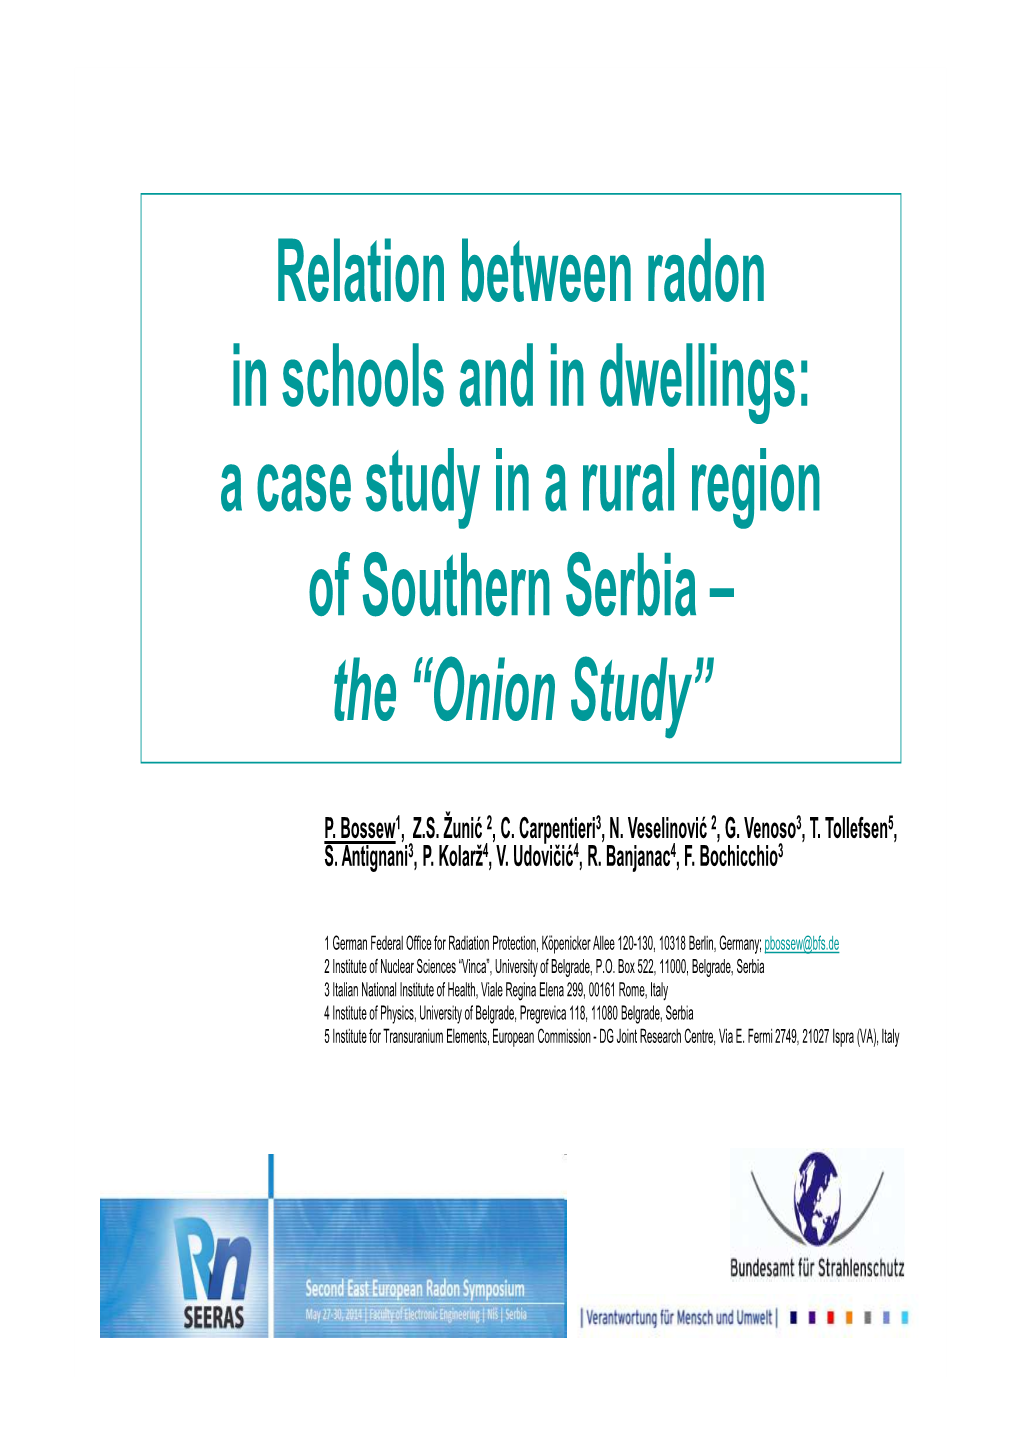 Relation Between Radon in Schools and in Dwellings: a Case Study in a Rural Region of Southern Serbia – the “Onion Study”